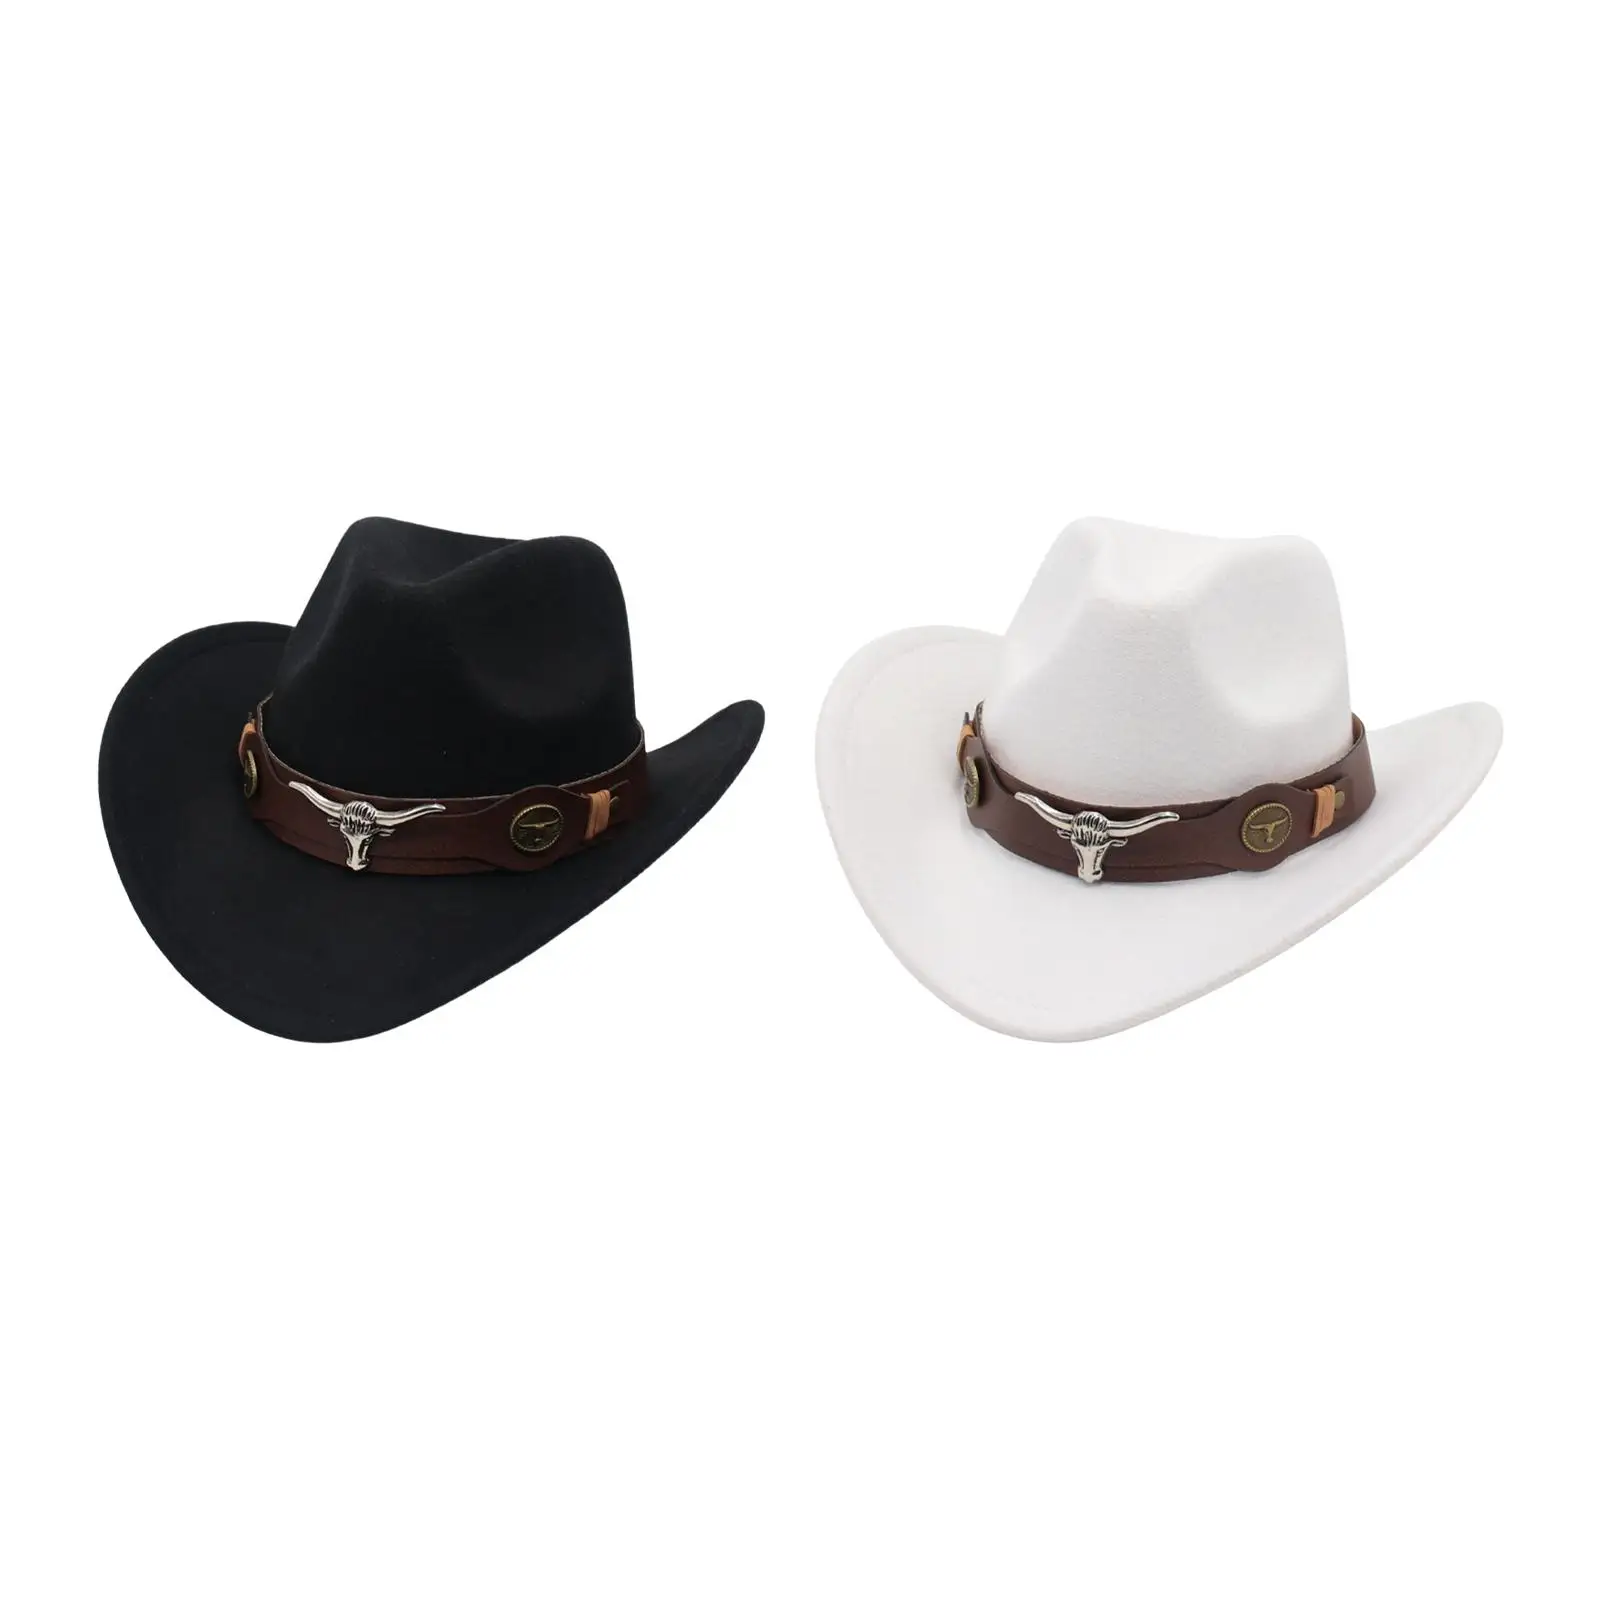 Casual Western Cowboy Hat Props Wide Brim Cosplay Costume Summer Sunshade Sun Hat for Adults Women Men Outdoor, Camping, Travel